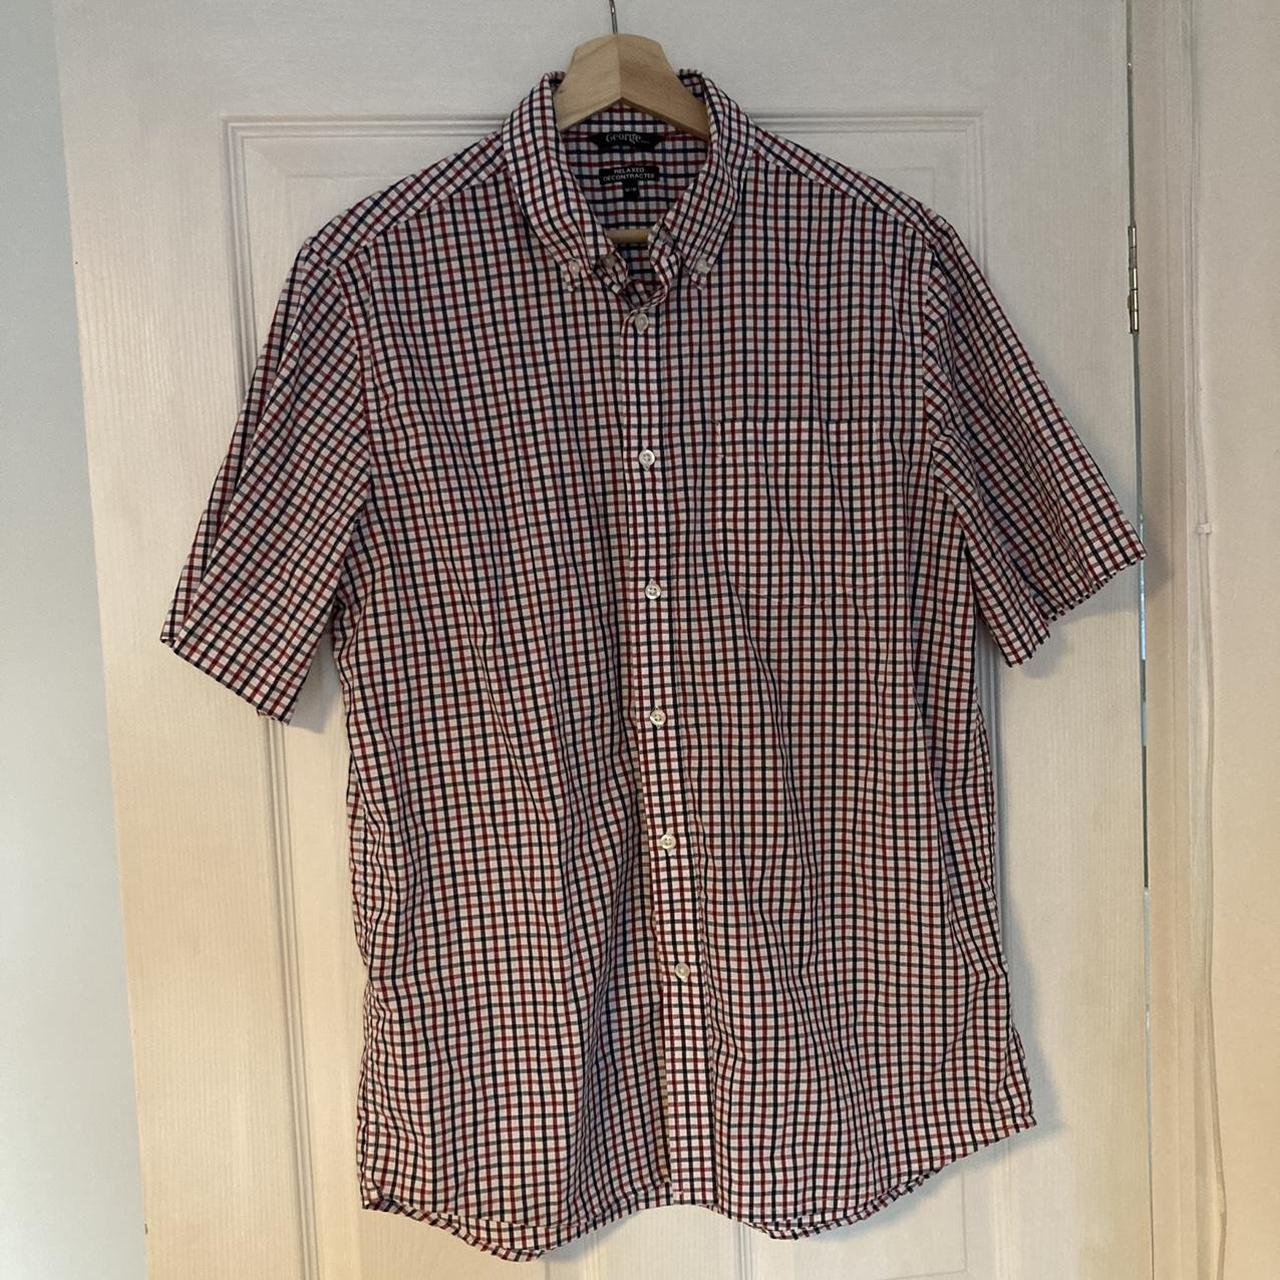 Men's White and Red Shirt | Depop